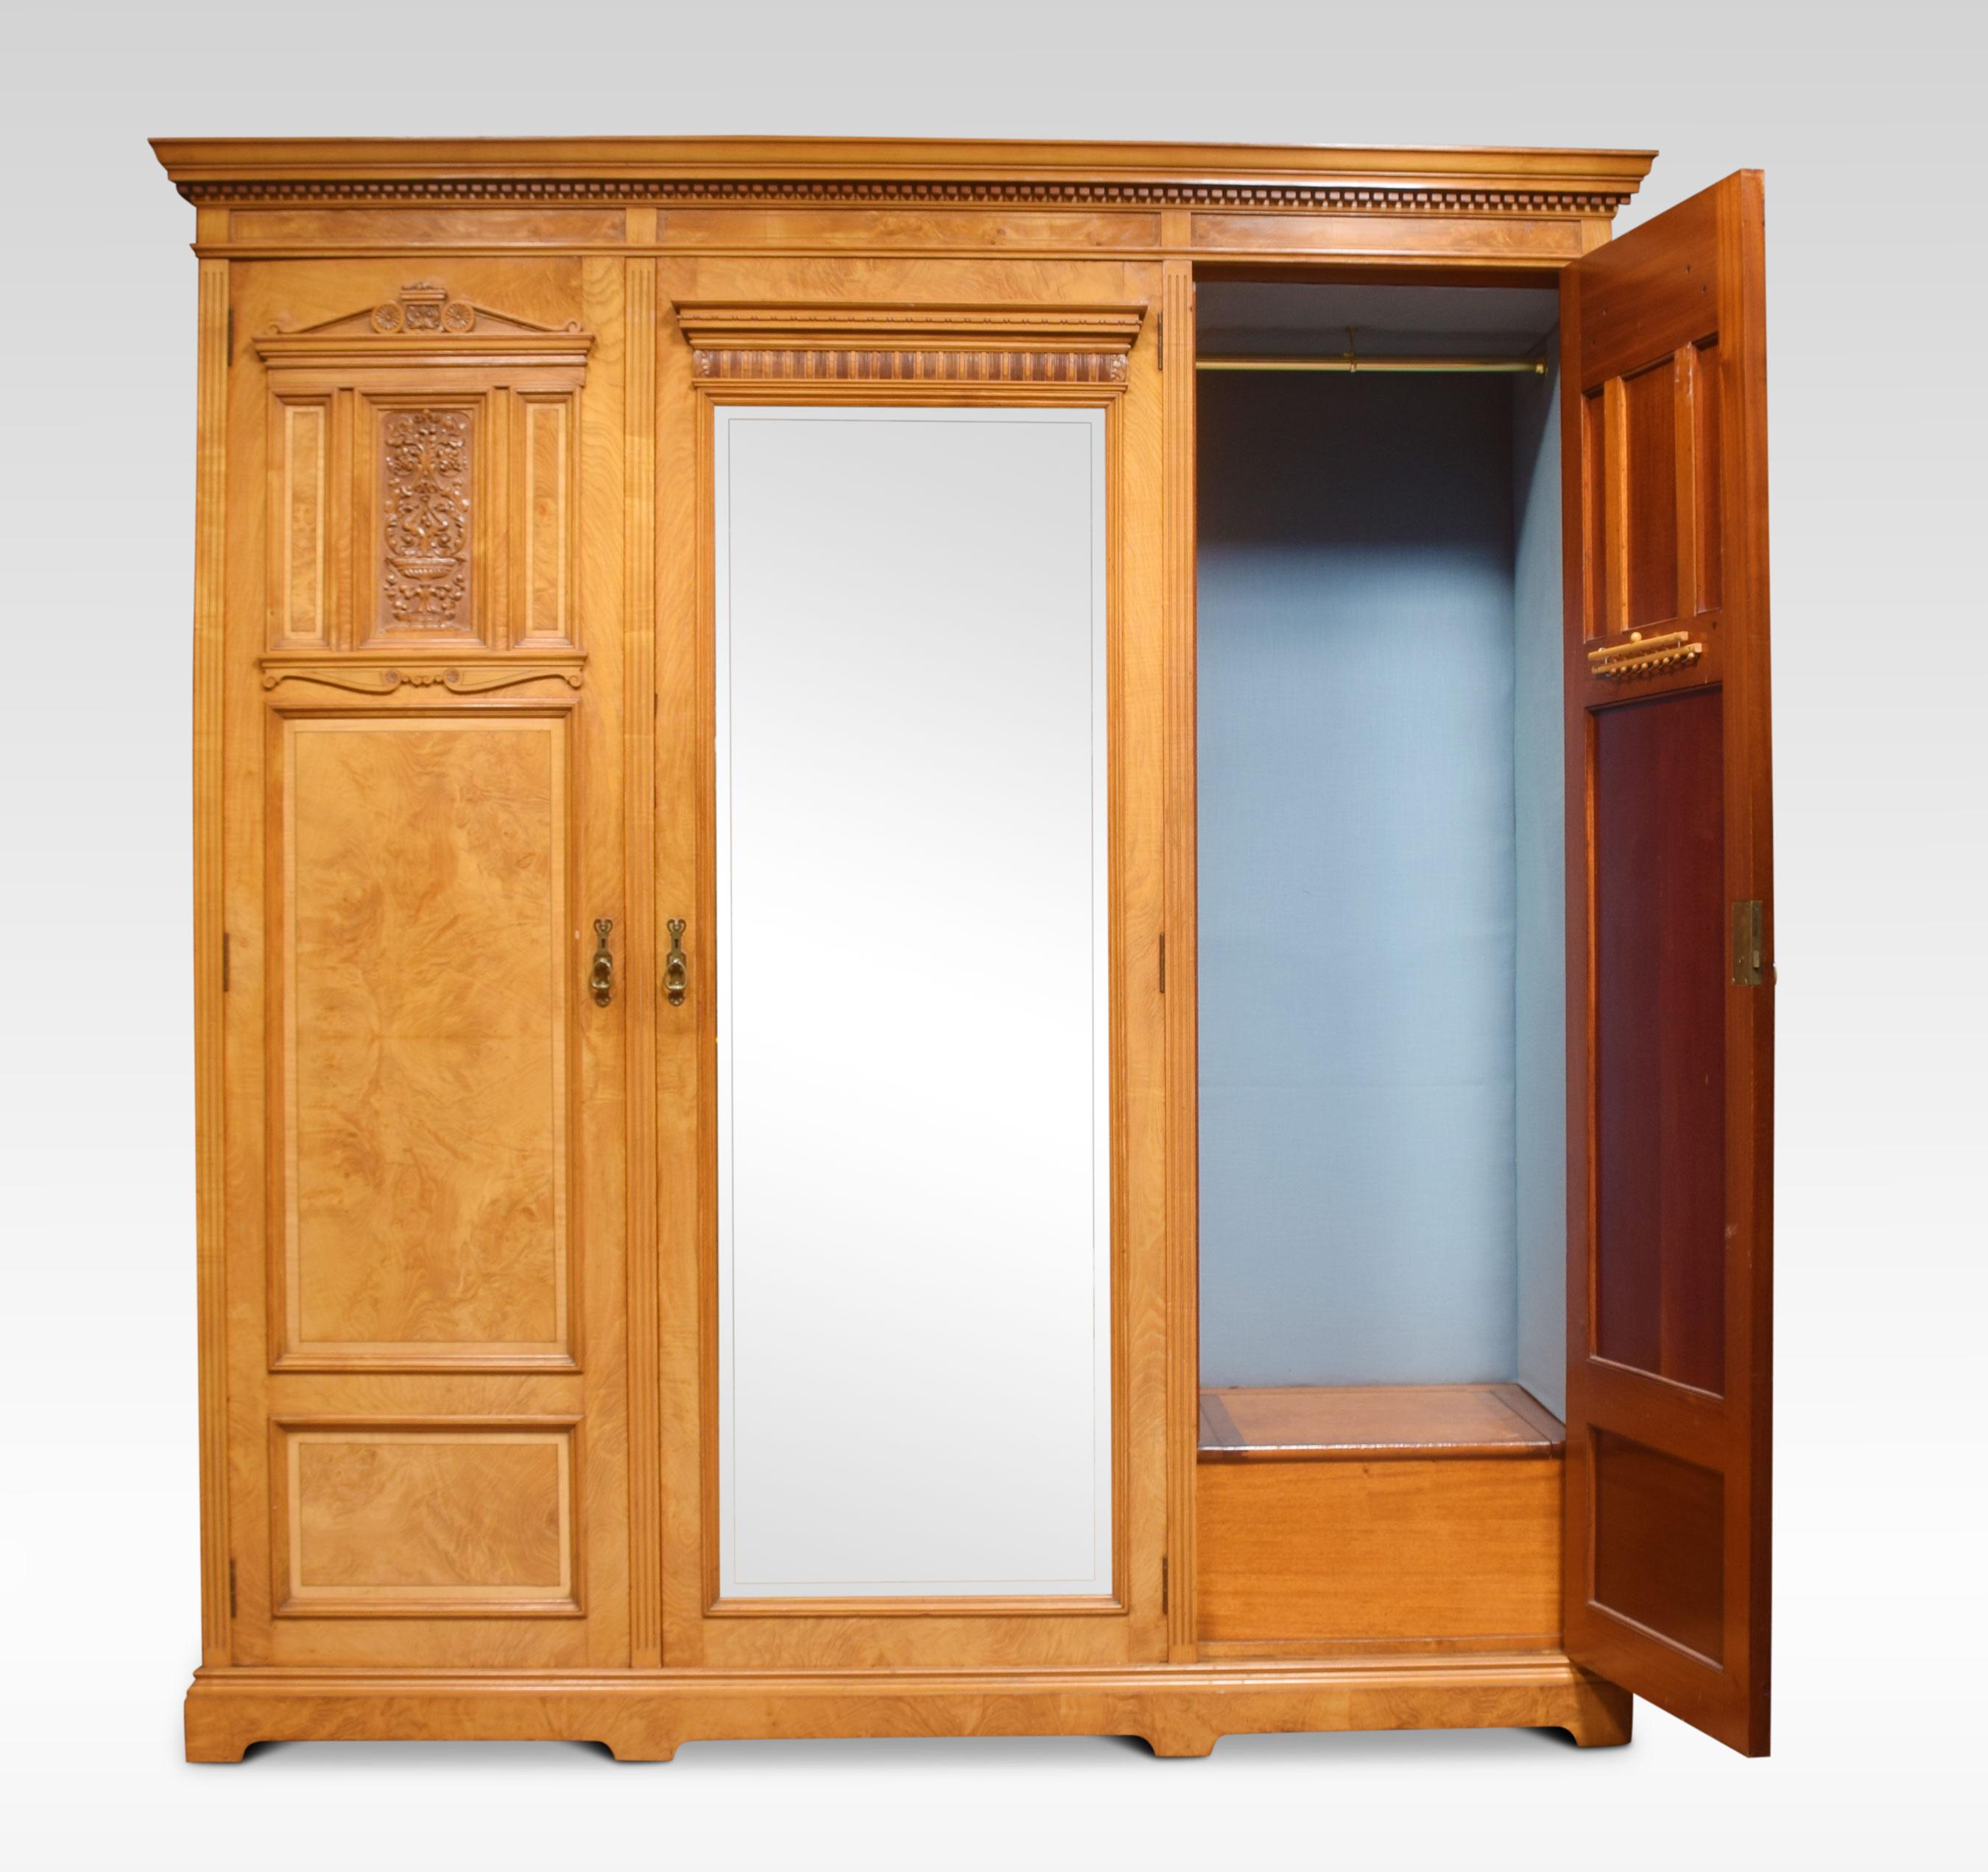 Maple and Co wardrobe, the dentil moulded frieze above a large central beveled mirror door opening to reveal a fitted interior, flanked by two paneled doors with crisply carved leaf decoration. Opening to reveal a large hanging area. All raised up